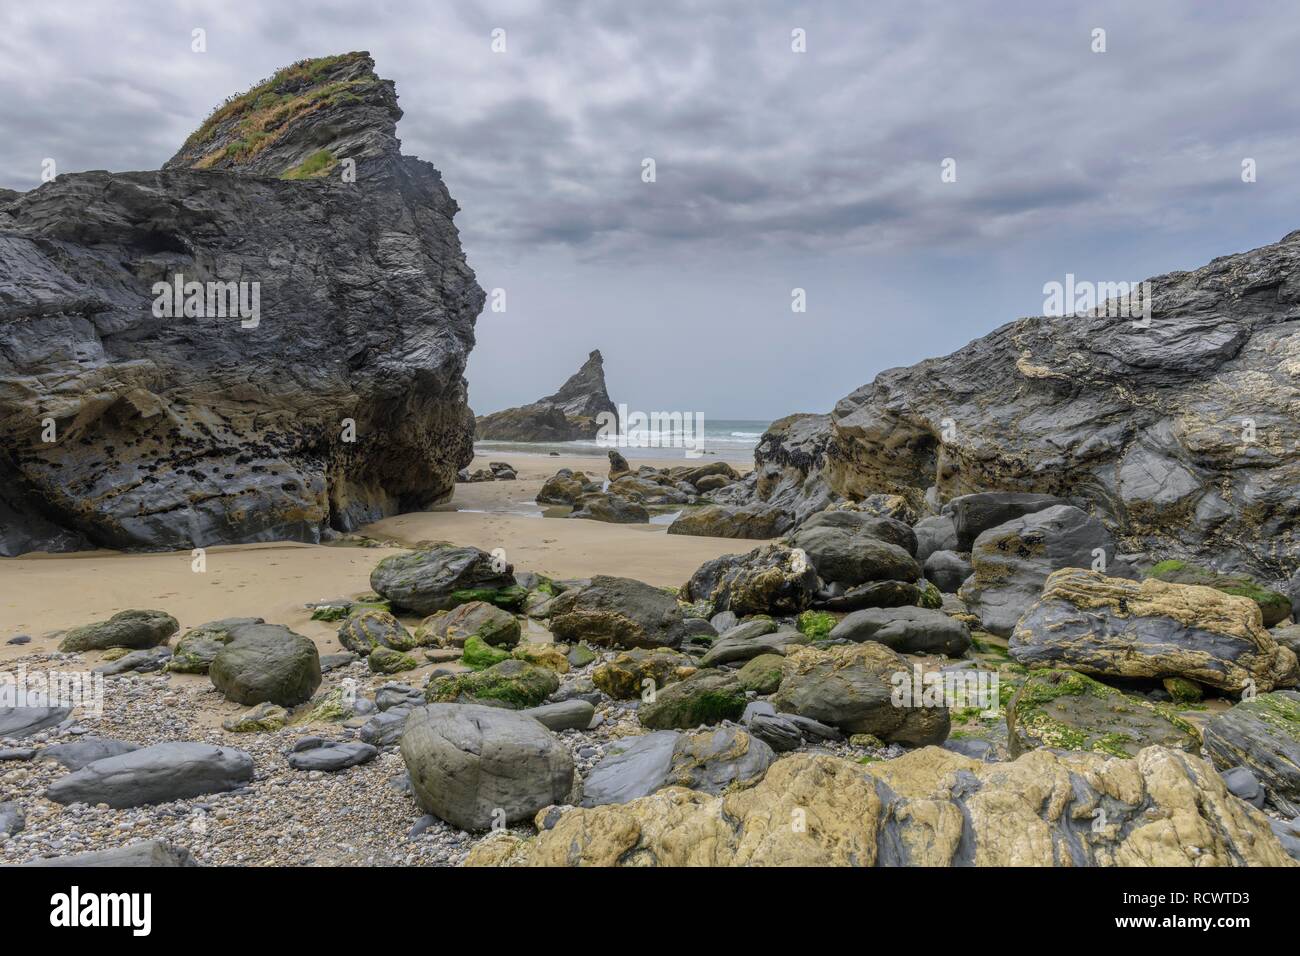 Rocky coast of the Bedruthan Steps, Saint Eval, England, Great Britain Stock Photo